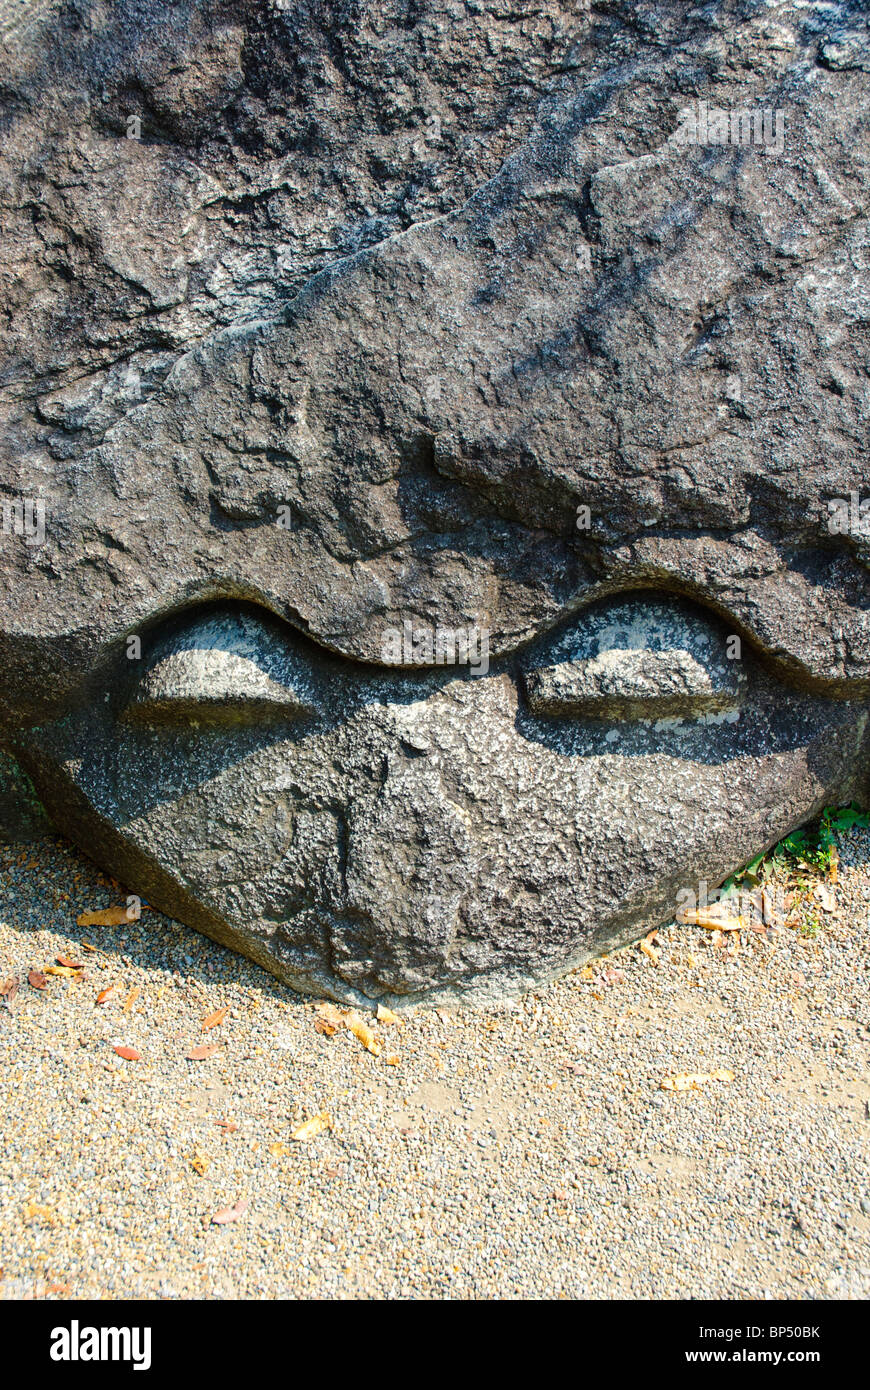 Kameishi, or Tortoise Stone, an ancient carving in the Asuka area of Nara Prefecture, Japan Stock Photo